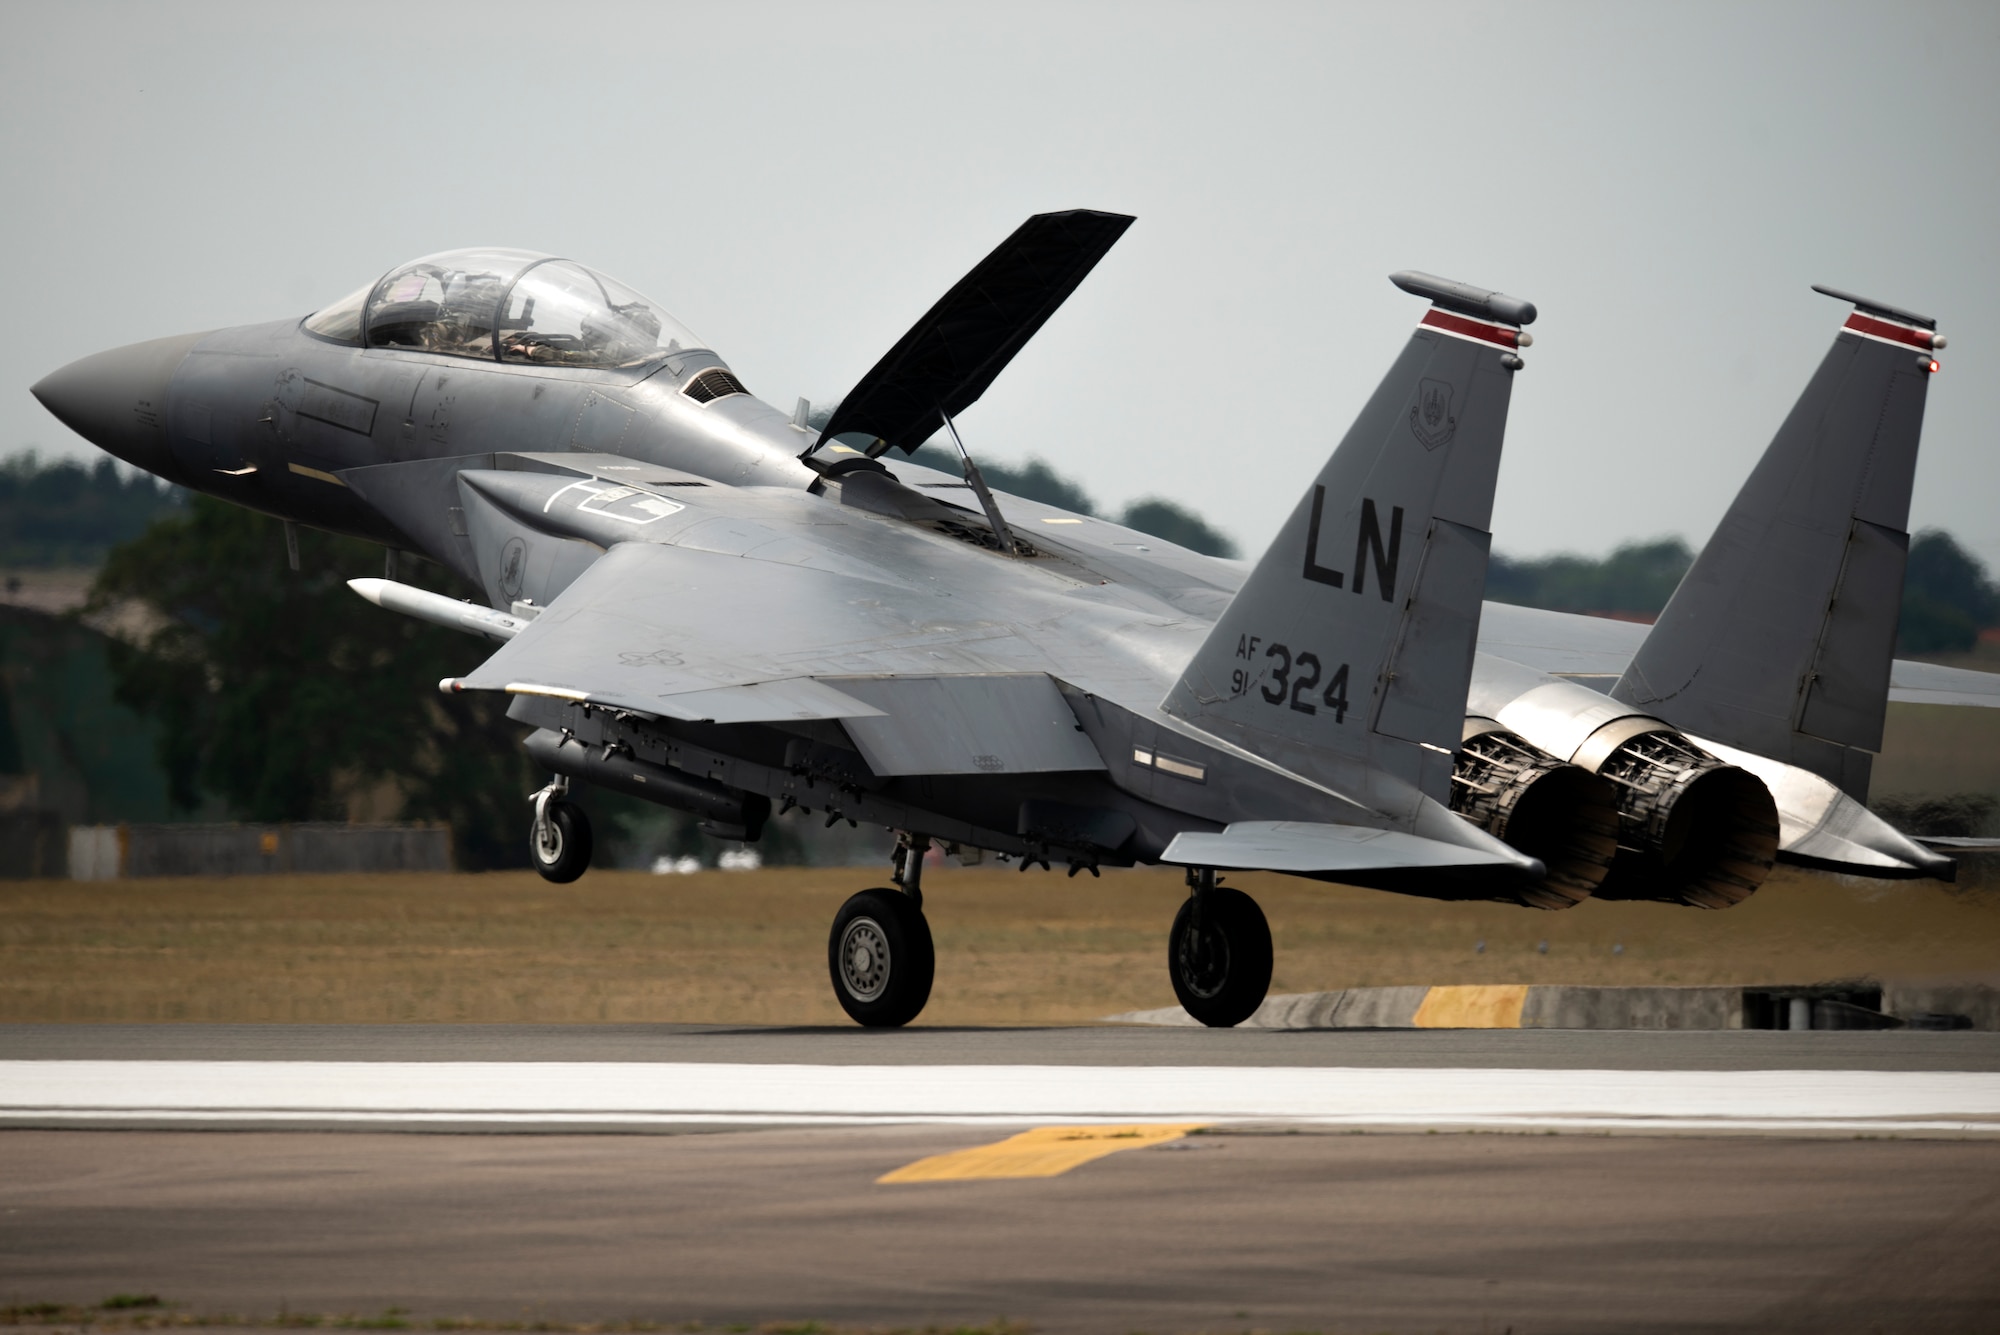 An F-15E Strike Eagle assigned to the 494th Fighter Squadron lands at Royal Air Force Lakenheath, England, May 27, 2020. U.S. Air Force F-15s assigned to the 48th Fighter Wing, F-16s assigned to the 31st Fighter Wing and 52nd Fighter Wing, and KC-135s assigned to the 100th Air Refueling Wing participated in a large force exercise within the U.K. North Sea airspace. (U.S. Air Force photo by Airman 1st Class Jessi Monte)